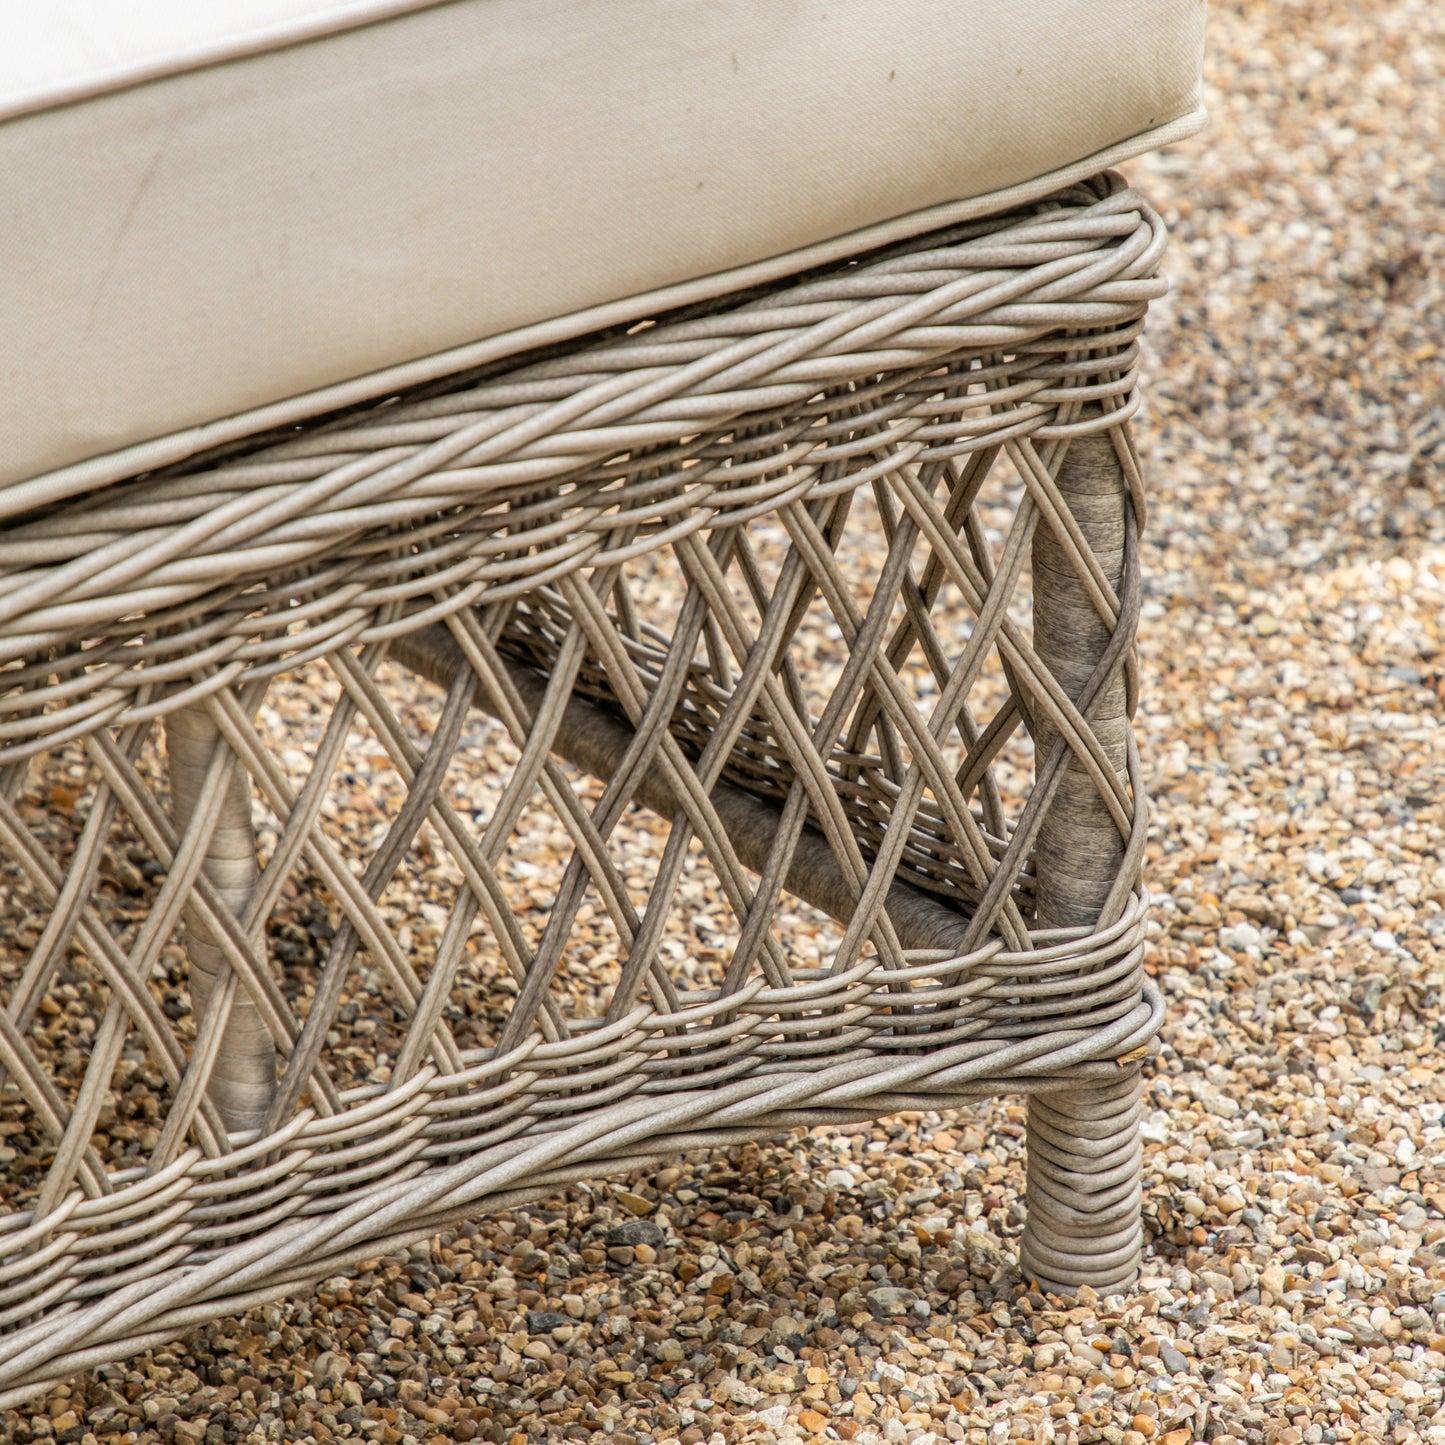 A close up of the Allington Chaise Set Stone by Kikiathome.co.uk, a home furniture piece for interior decor, on gravel.